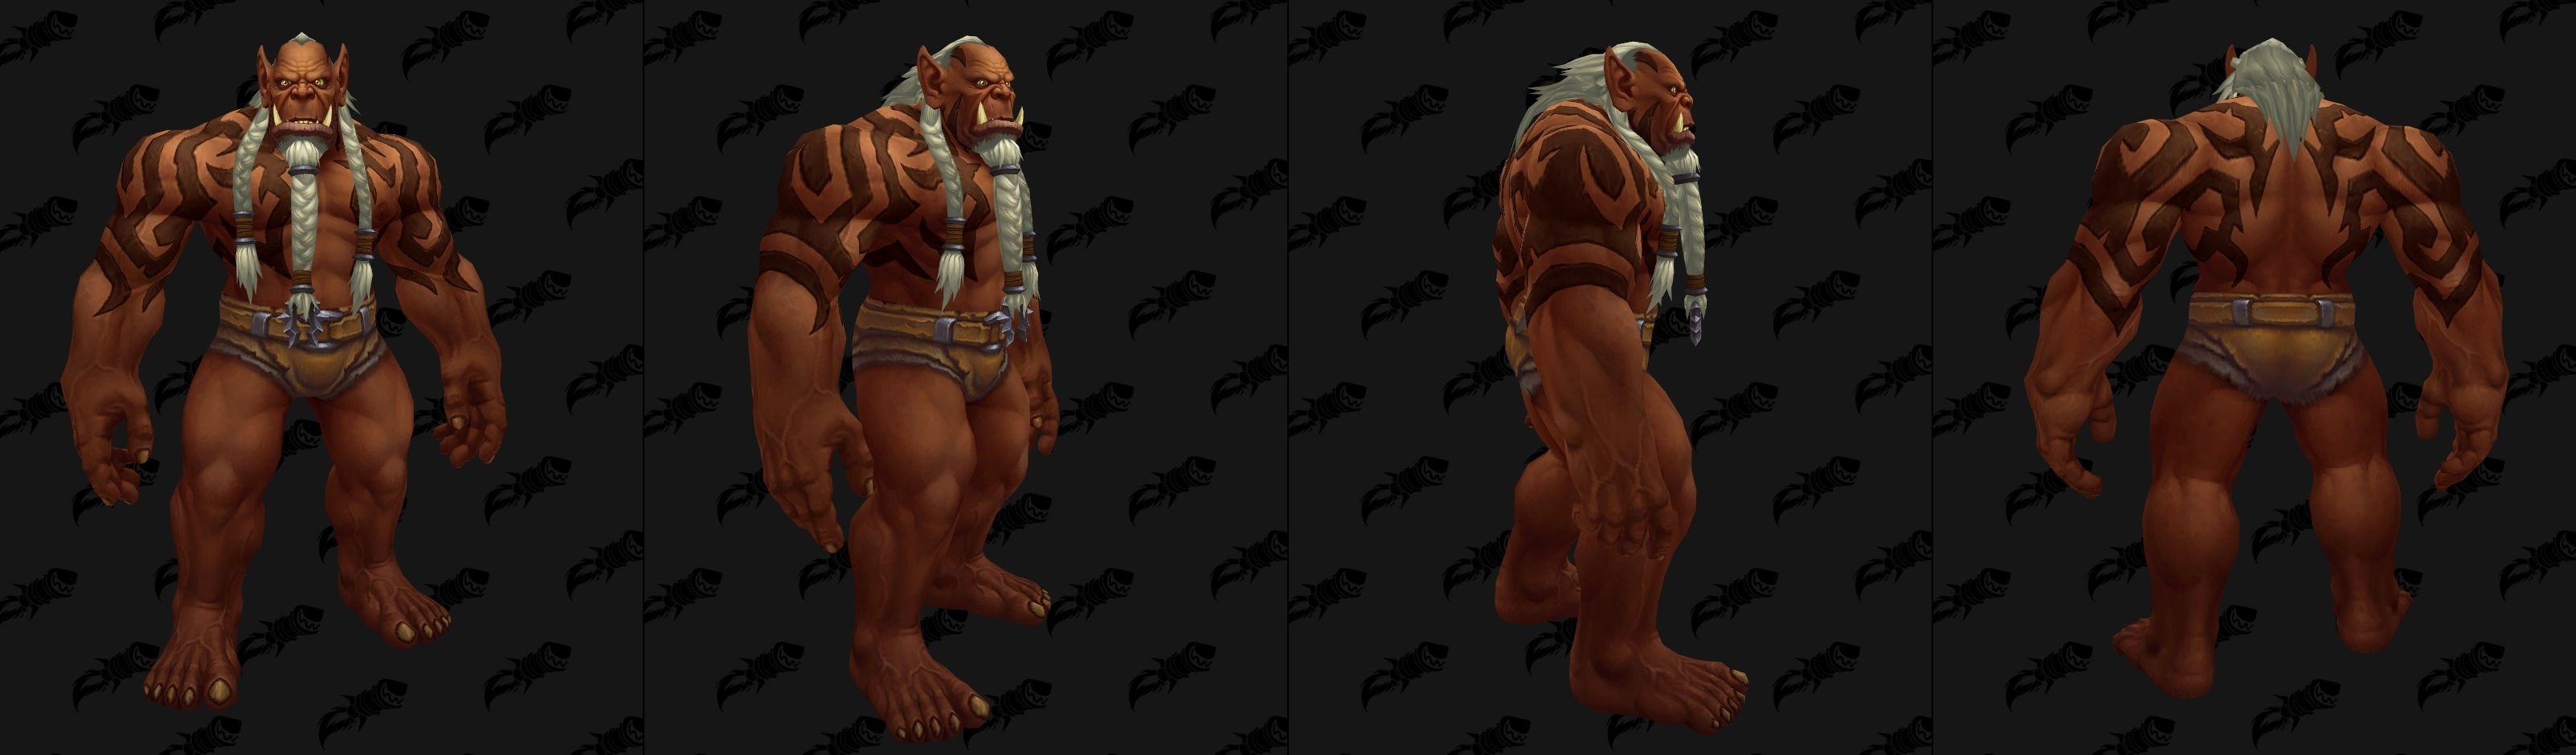 WoW Upright Orcs brown